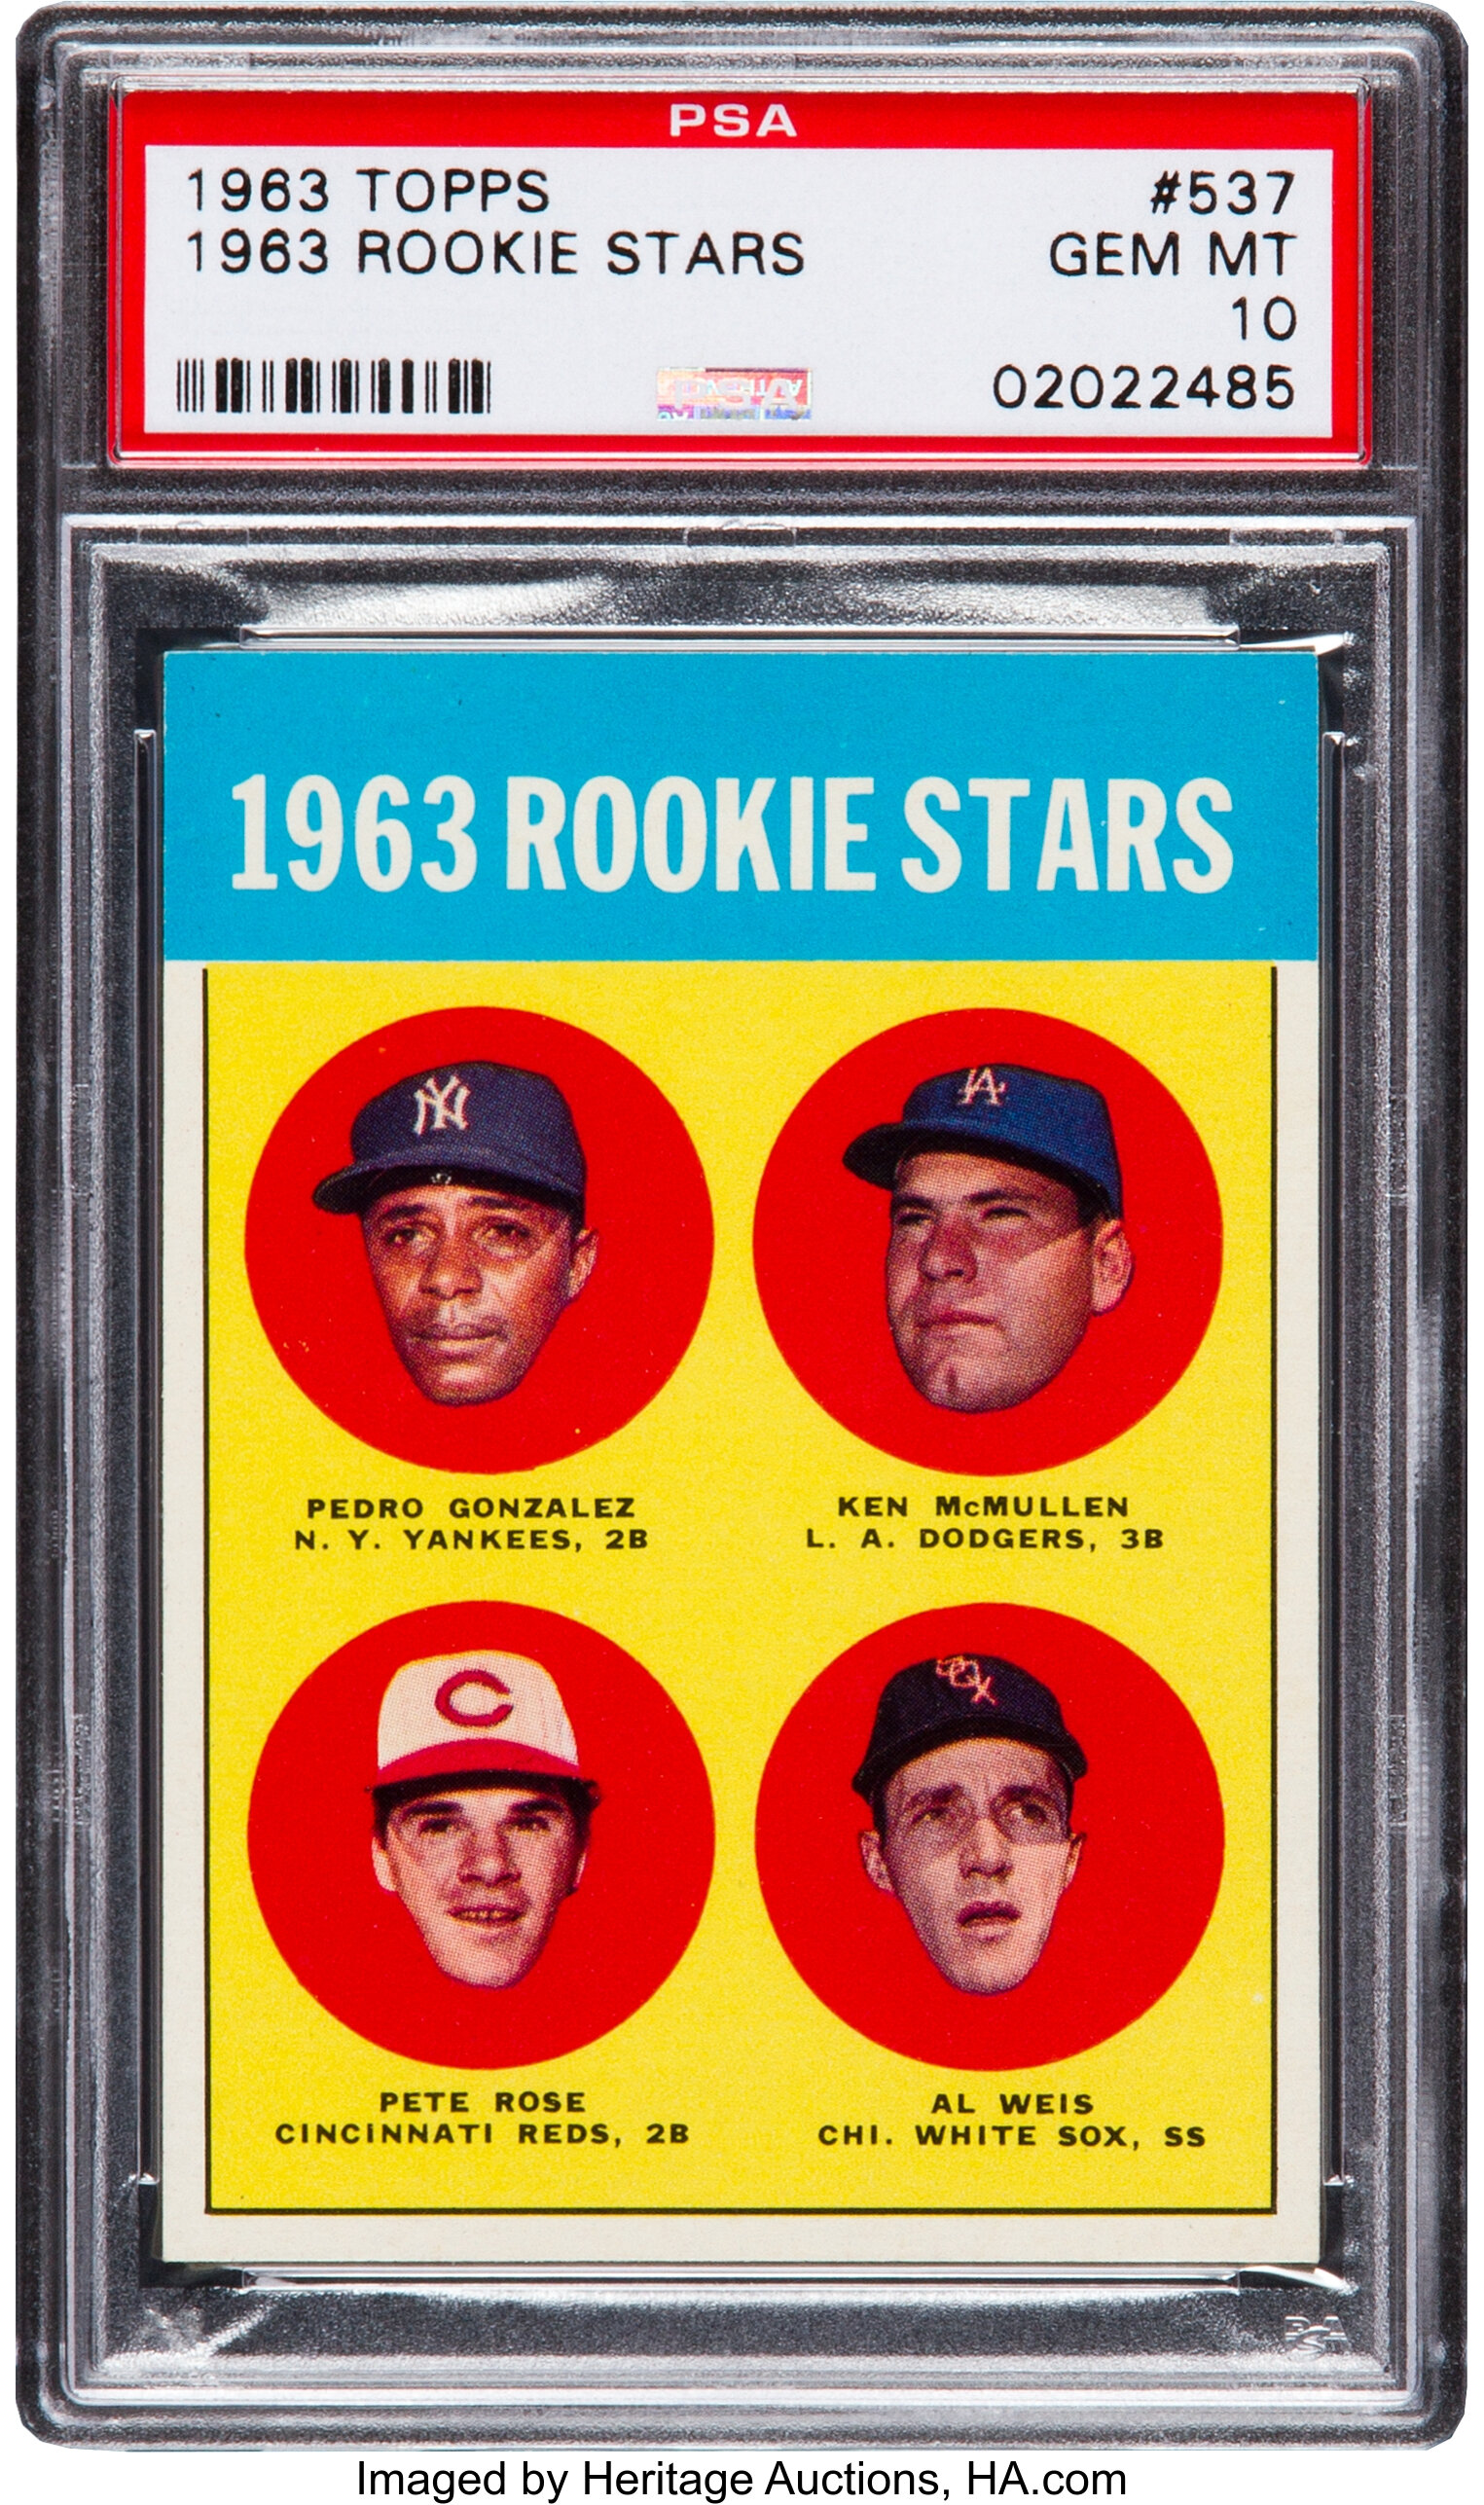 1964 Topps Pete Rose All-Star Rookie #125 PSA 5.5 – Boxseat